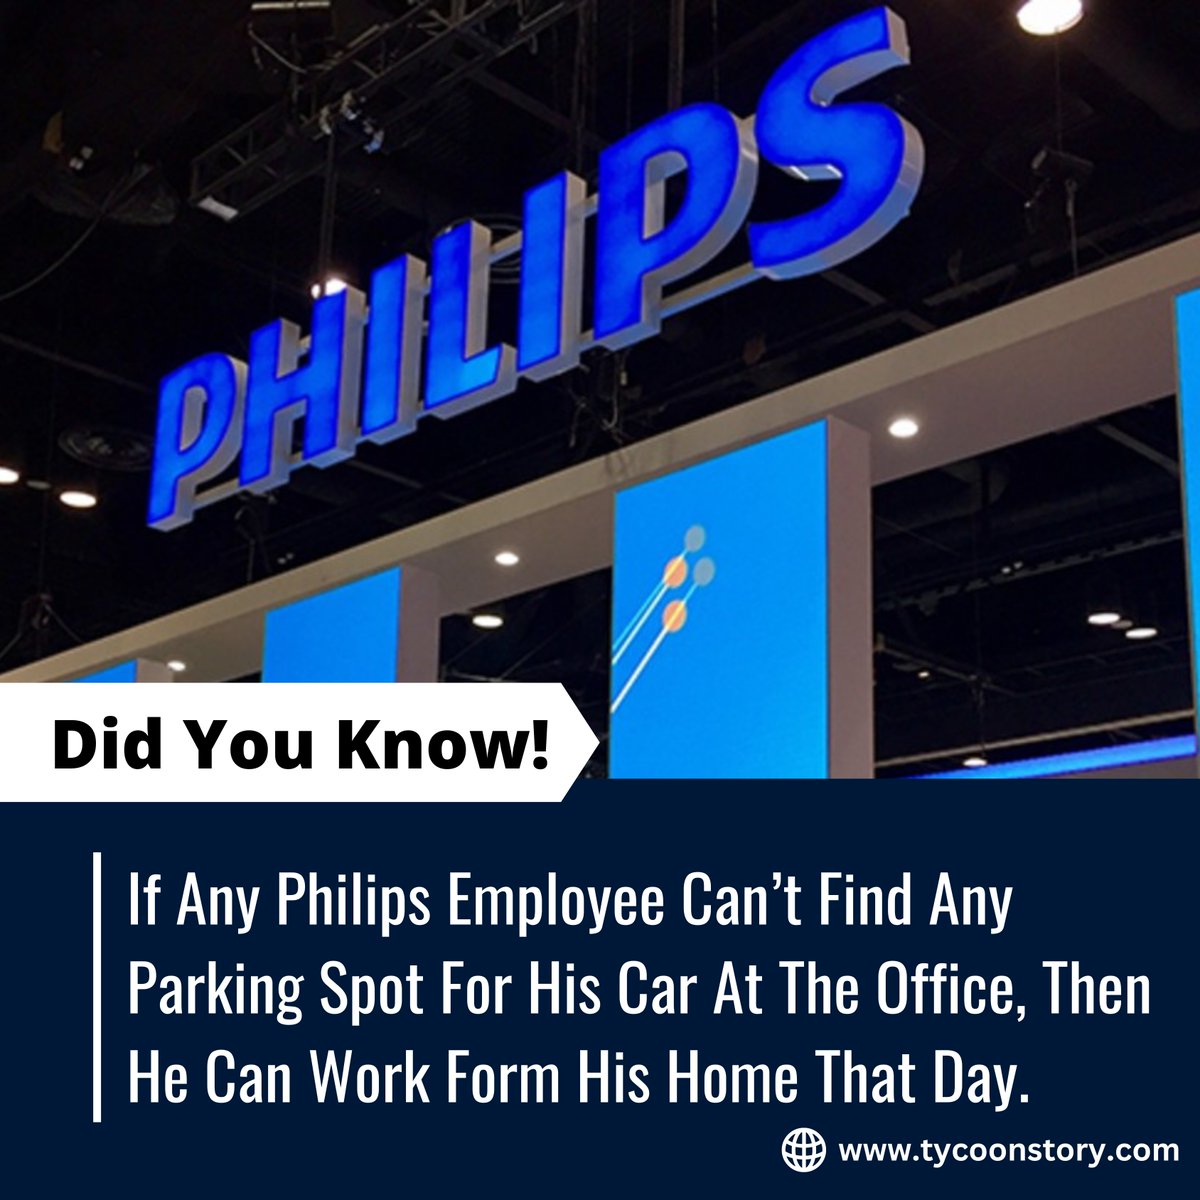 If a Philips employee can't find parking at the office, they can work from home that day.
#DidYouKnow #didyouknowfacts #Philips #workfromhome #remotework #Parkingchallenge #flexiblework #intrestingfacts #amazingfacts @TycoonStoryCo  @tycoonstory2020 
tycoonstory.com